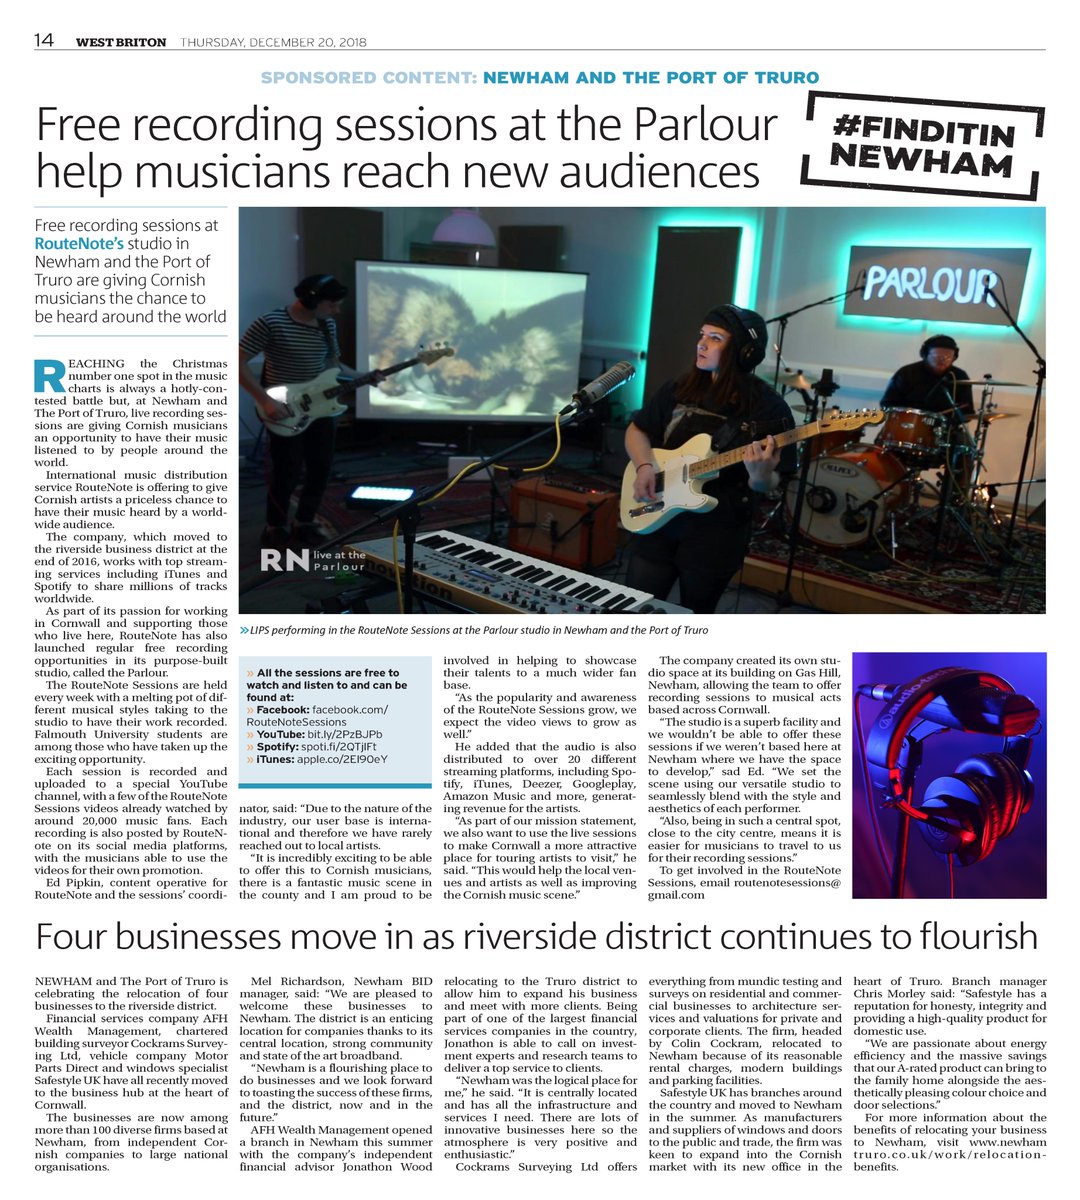 RouteNote’s new live sessions for independent artists featured in the paper